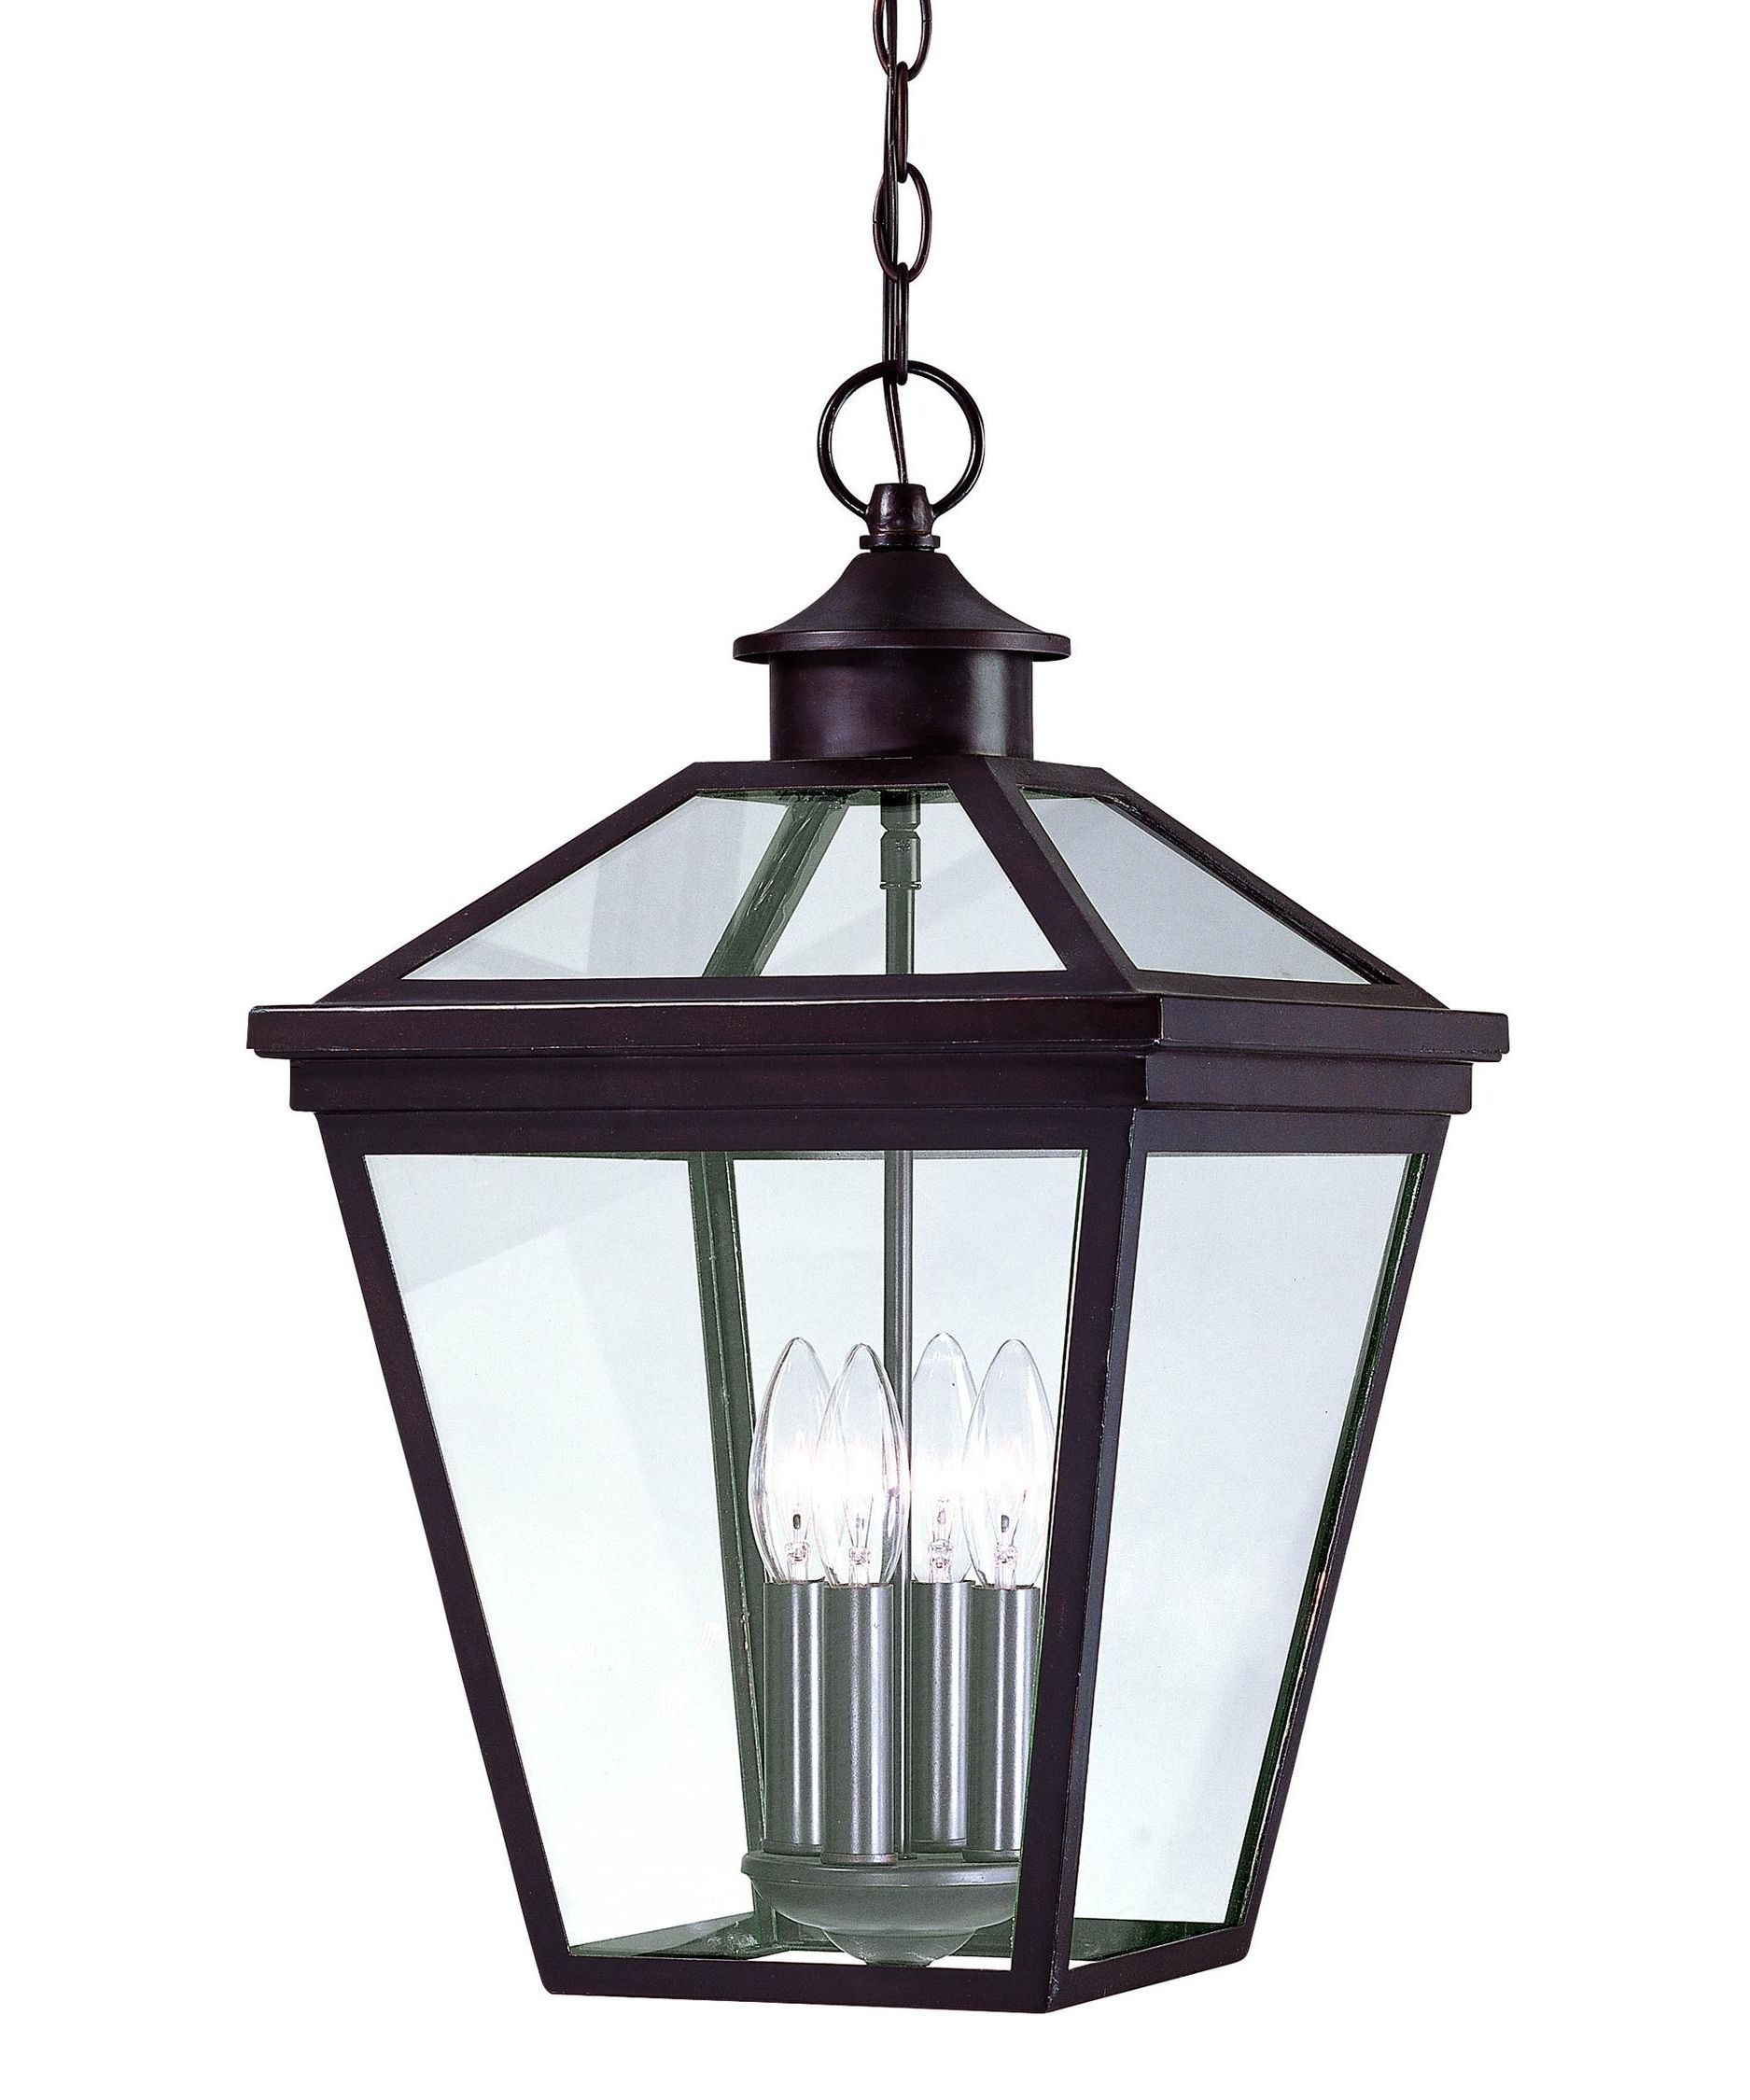 Outdoor Hanging Lanterns Battery Operated Bar Lighting Fixtures Mid Pertaining To Trendy Outdoor Battery Lanterns For Patio (View 17 of 20)